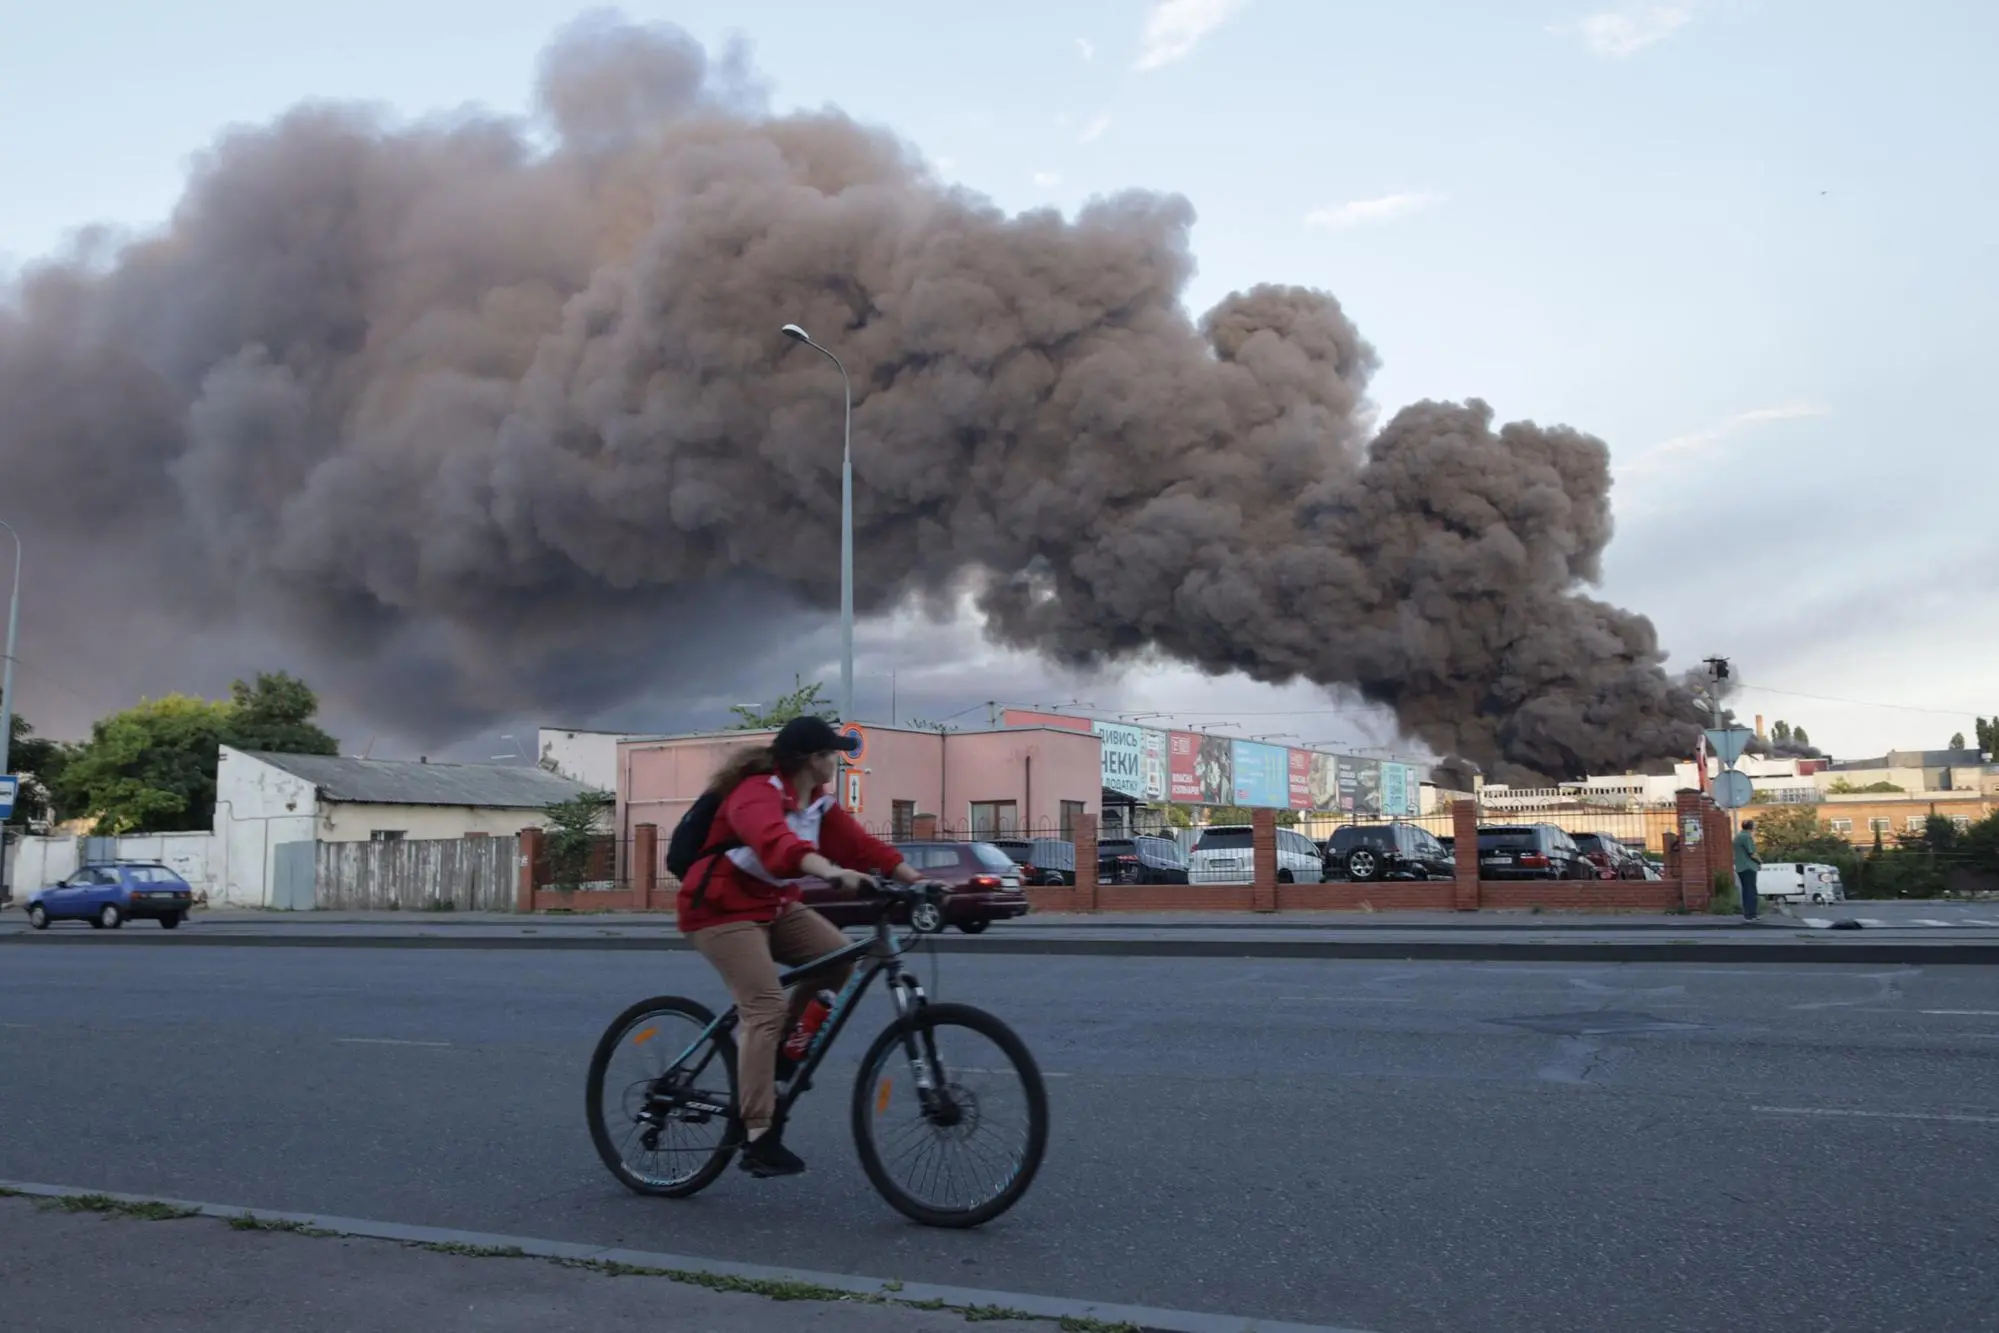 TOPSHOT - A woman riding a bicycle drives past a cloud of smoke from a fire in the background after a missile strike on a warehouse of an industrial and trading company in Odessa on July 16, 2022, amid the Russian invasion of Ukraine. (Photo by Oleksandr GIMANOV / AFP)